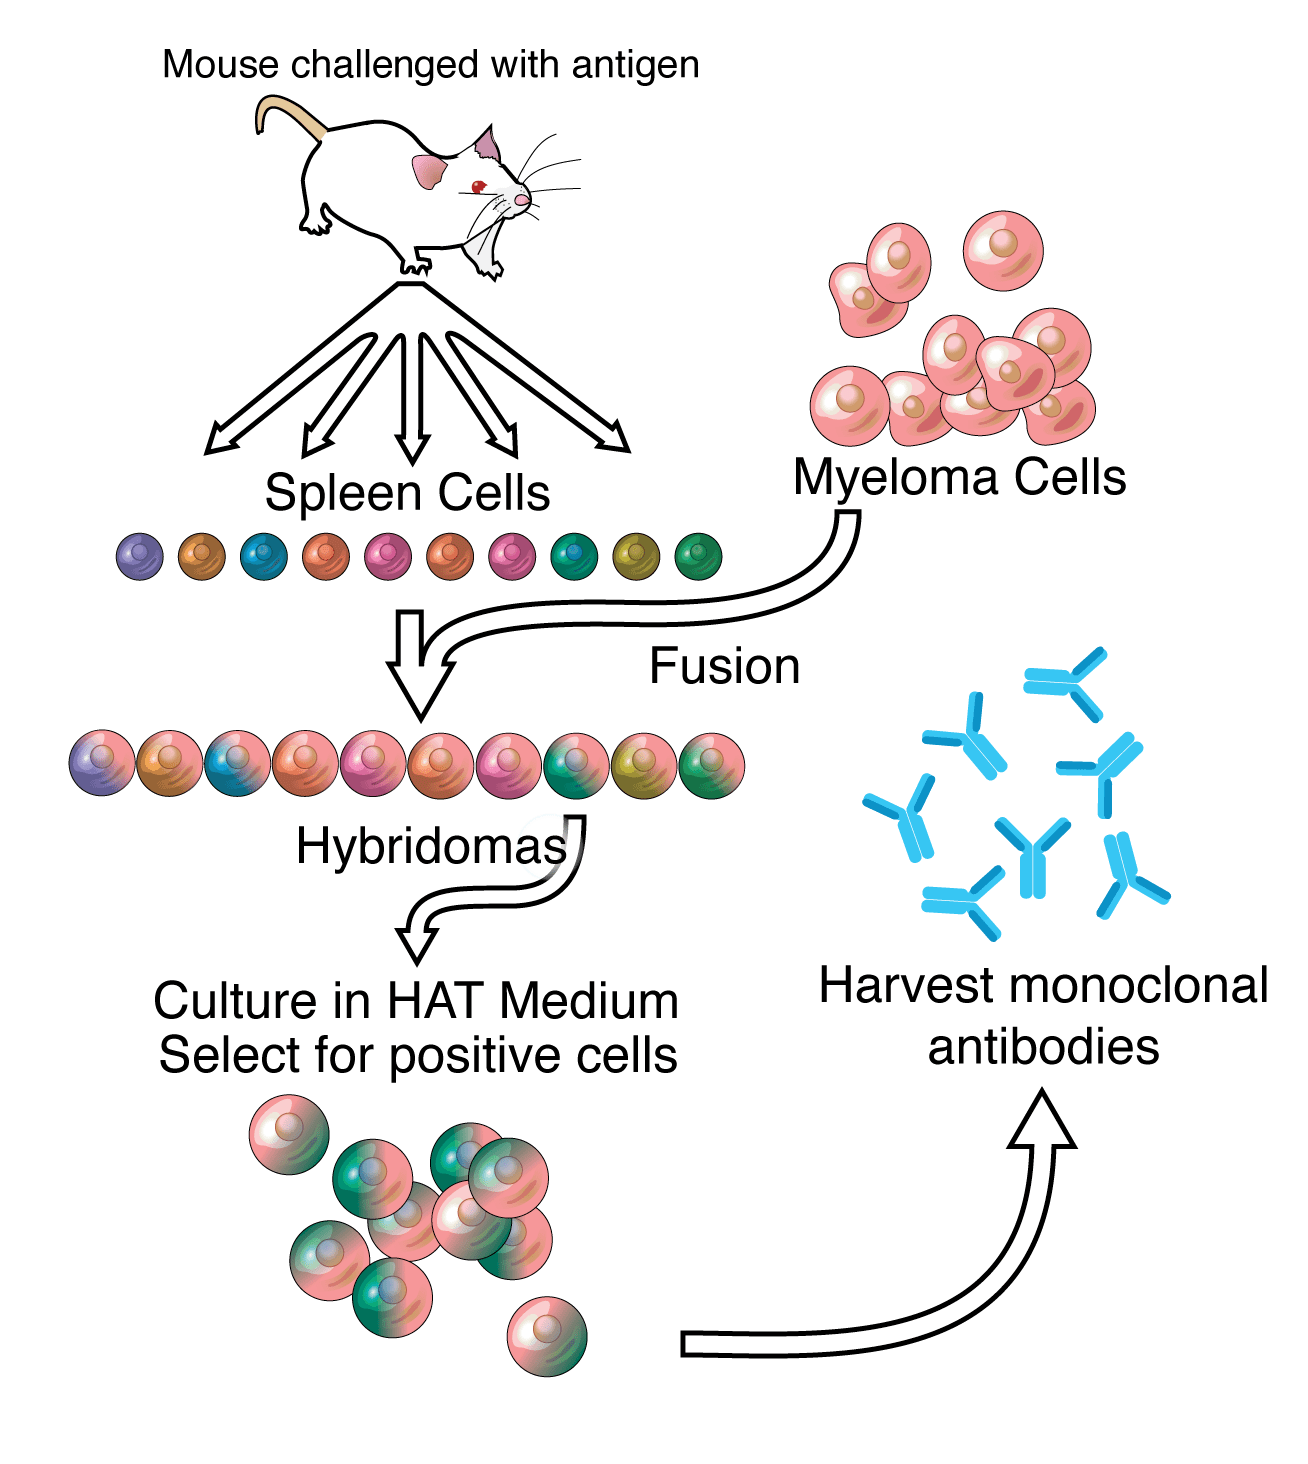 A general representation of the method used to produce monoclonal antibodies.